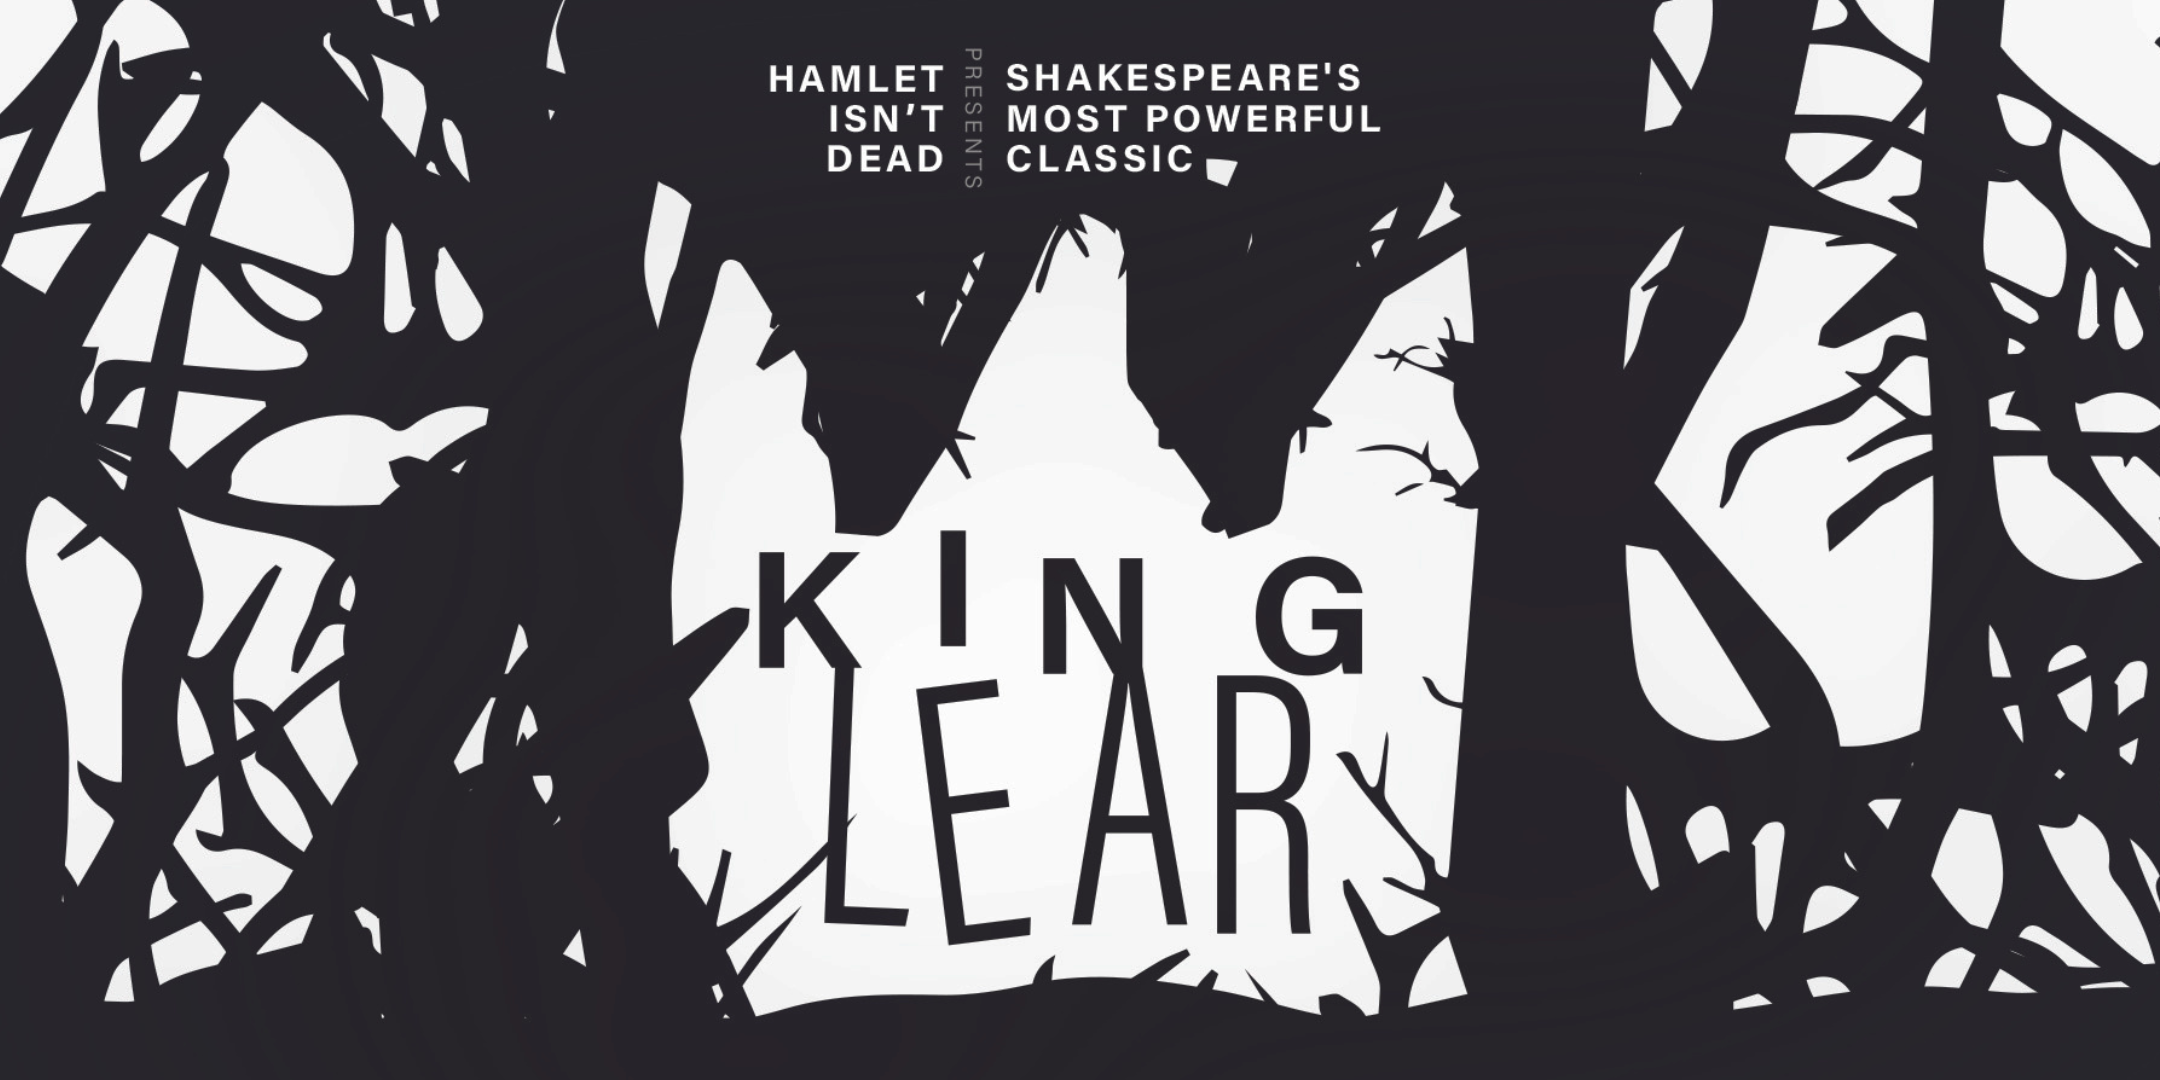 Playbill for Hamlet  PlayMakers Repertory Company